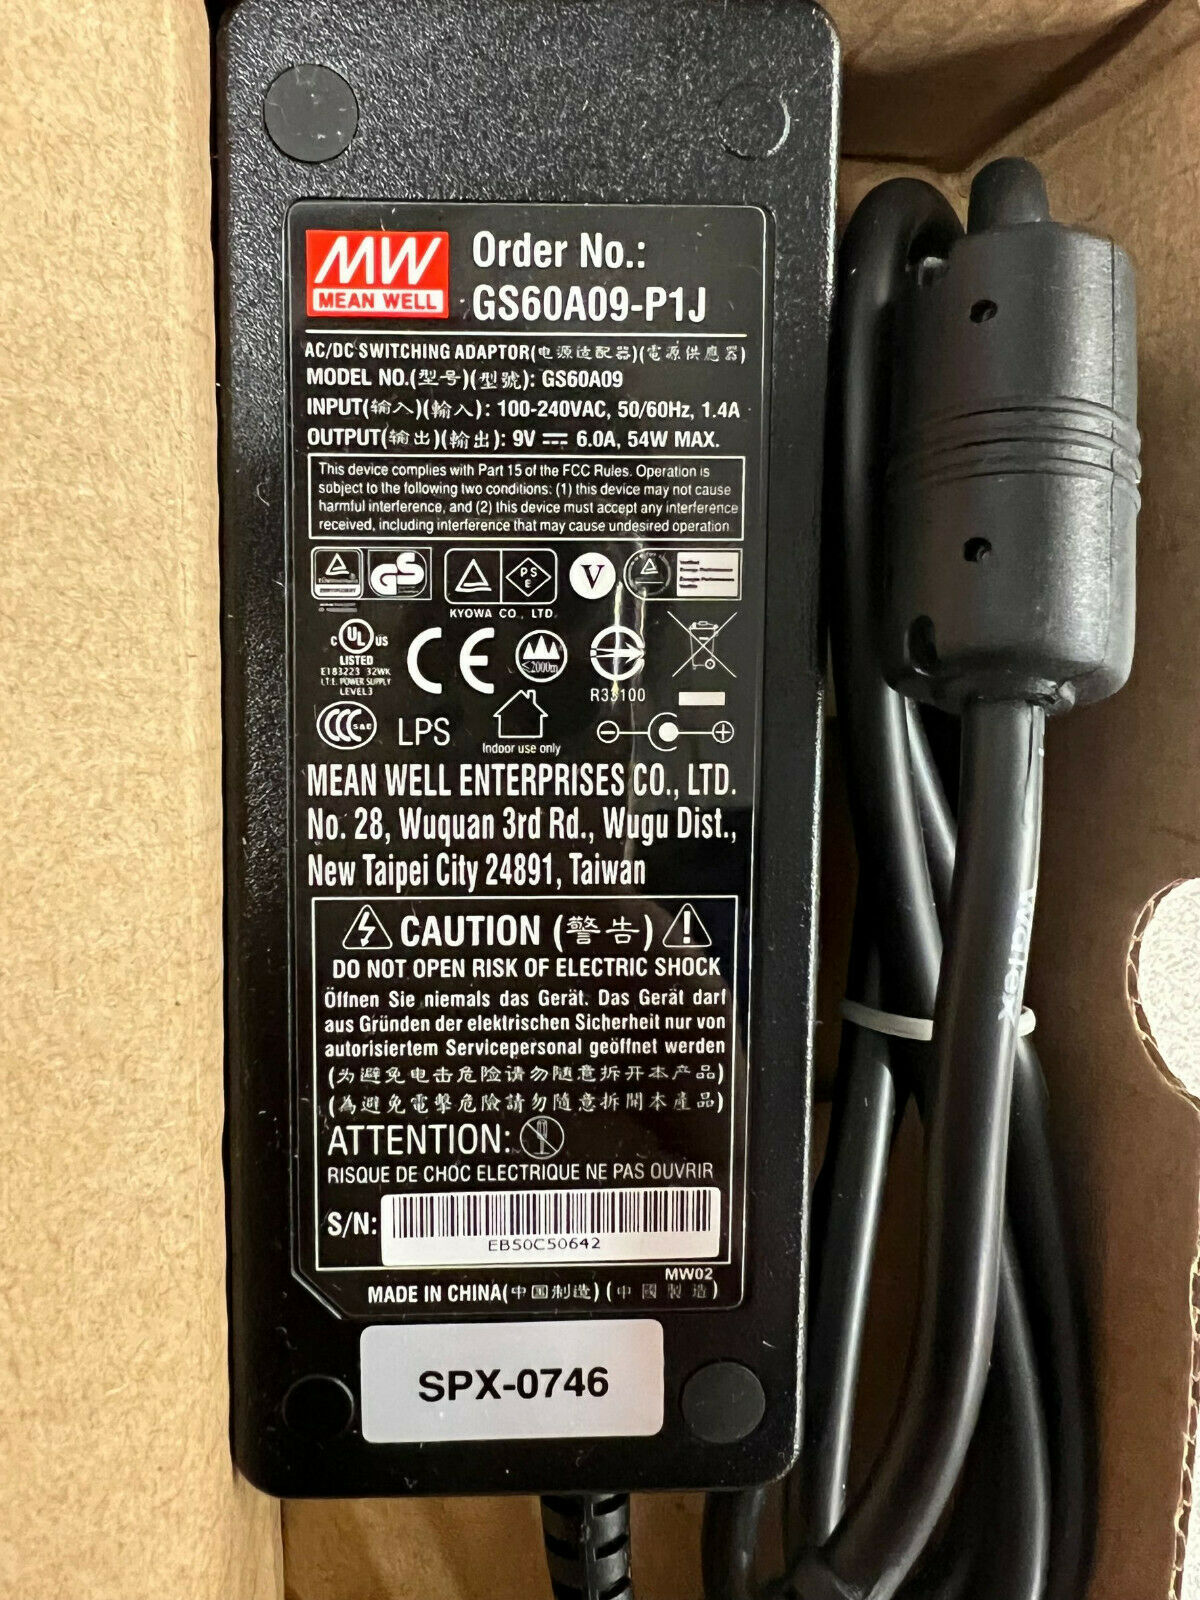 Original MW Mean Well GS60A09-P1J 9V 6A 54W AC Adapter Power Supply Cord Charger Compatible Model # or Part #: Brand